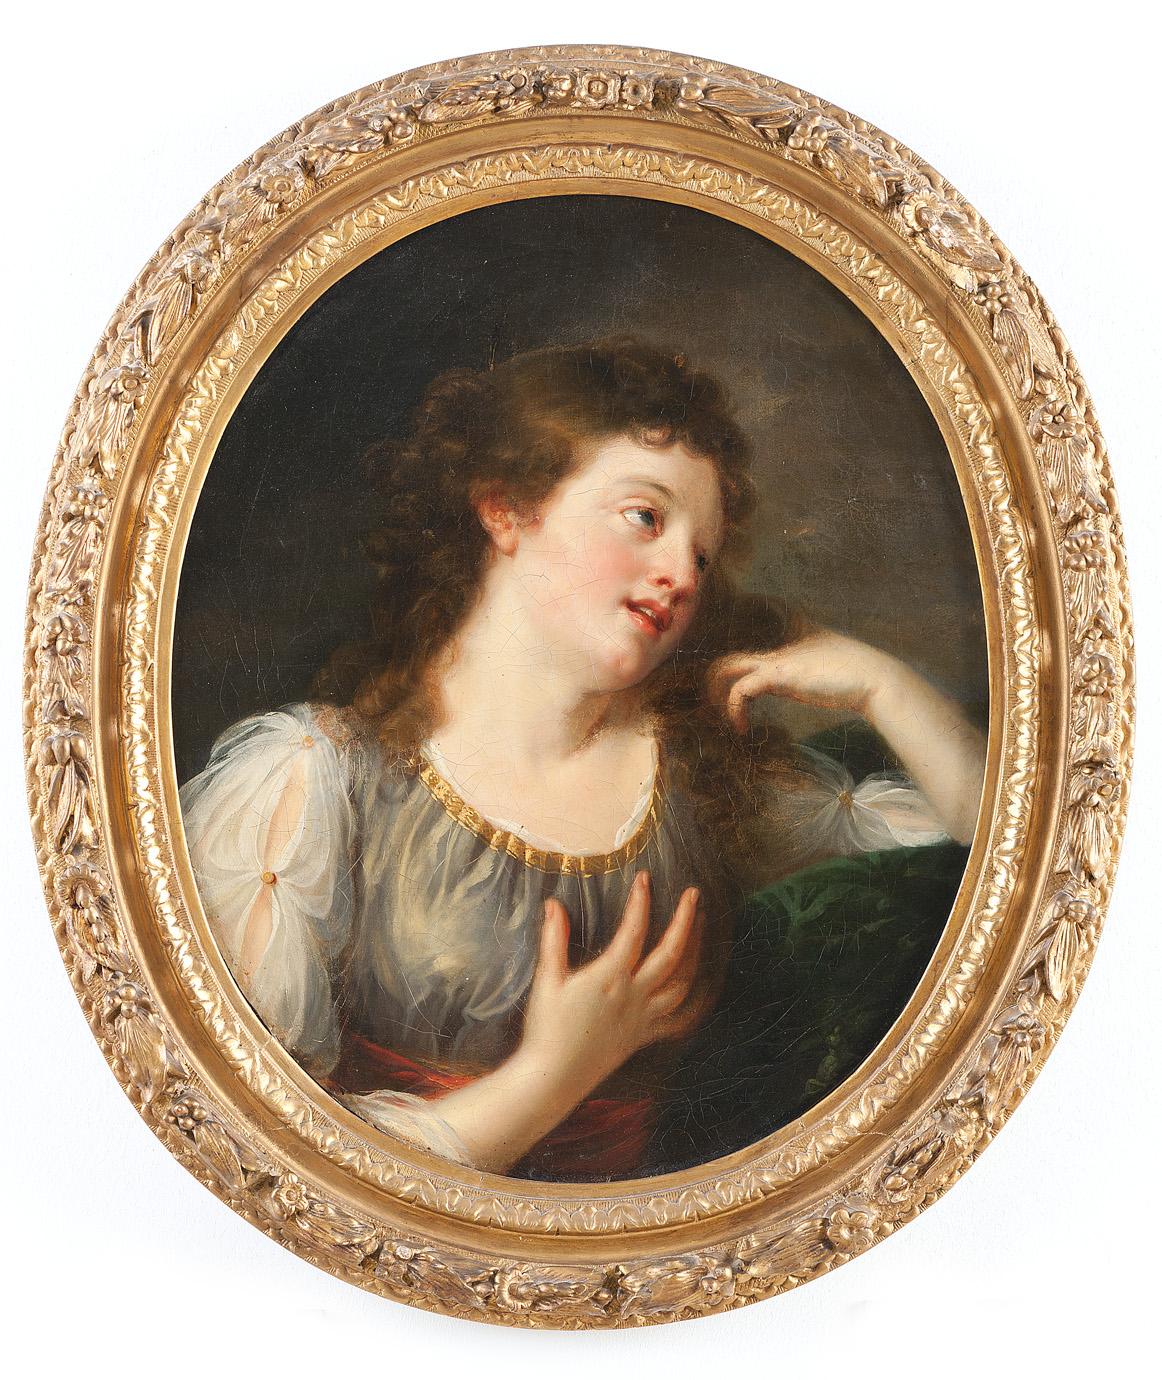 French School, Portrait of a Lady, Actress, Young Woman, French , Rococo, Oval